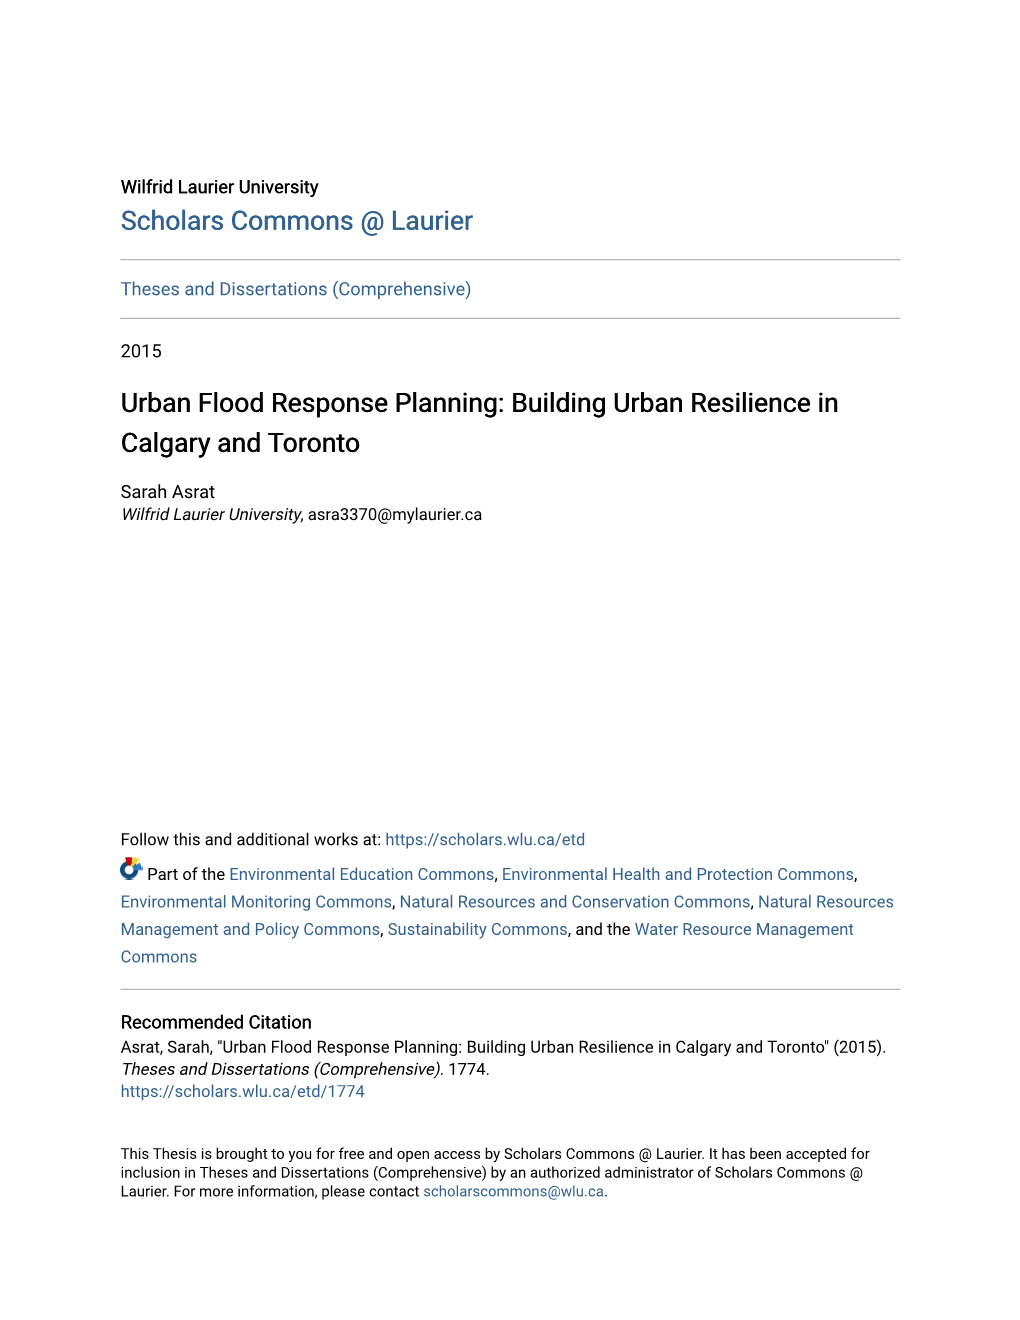 Urban Flood Response Planning: Building Urban Resilience in Calgary and Toronto